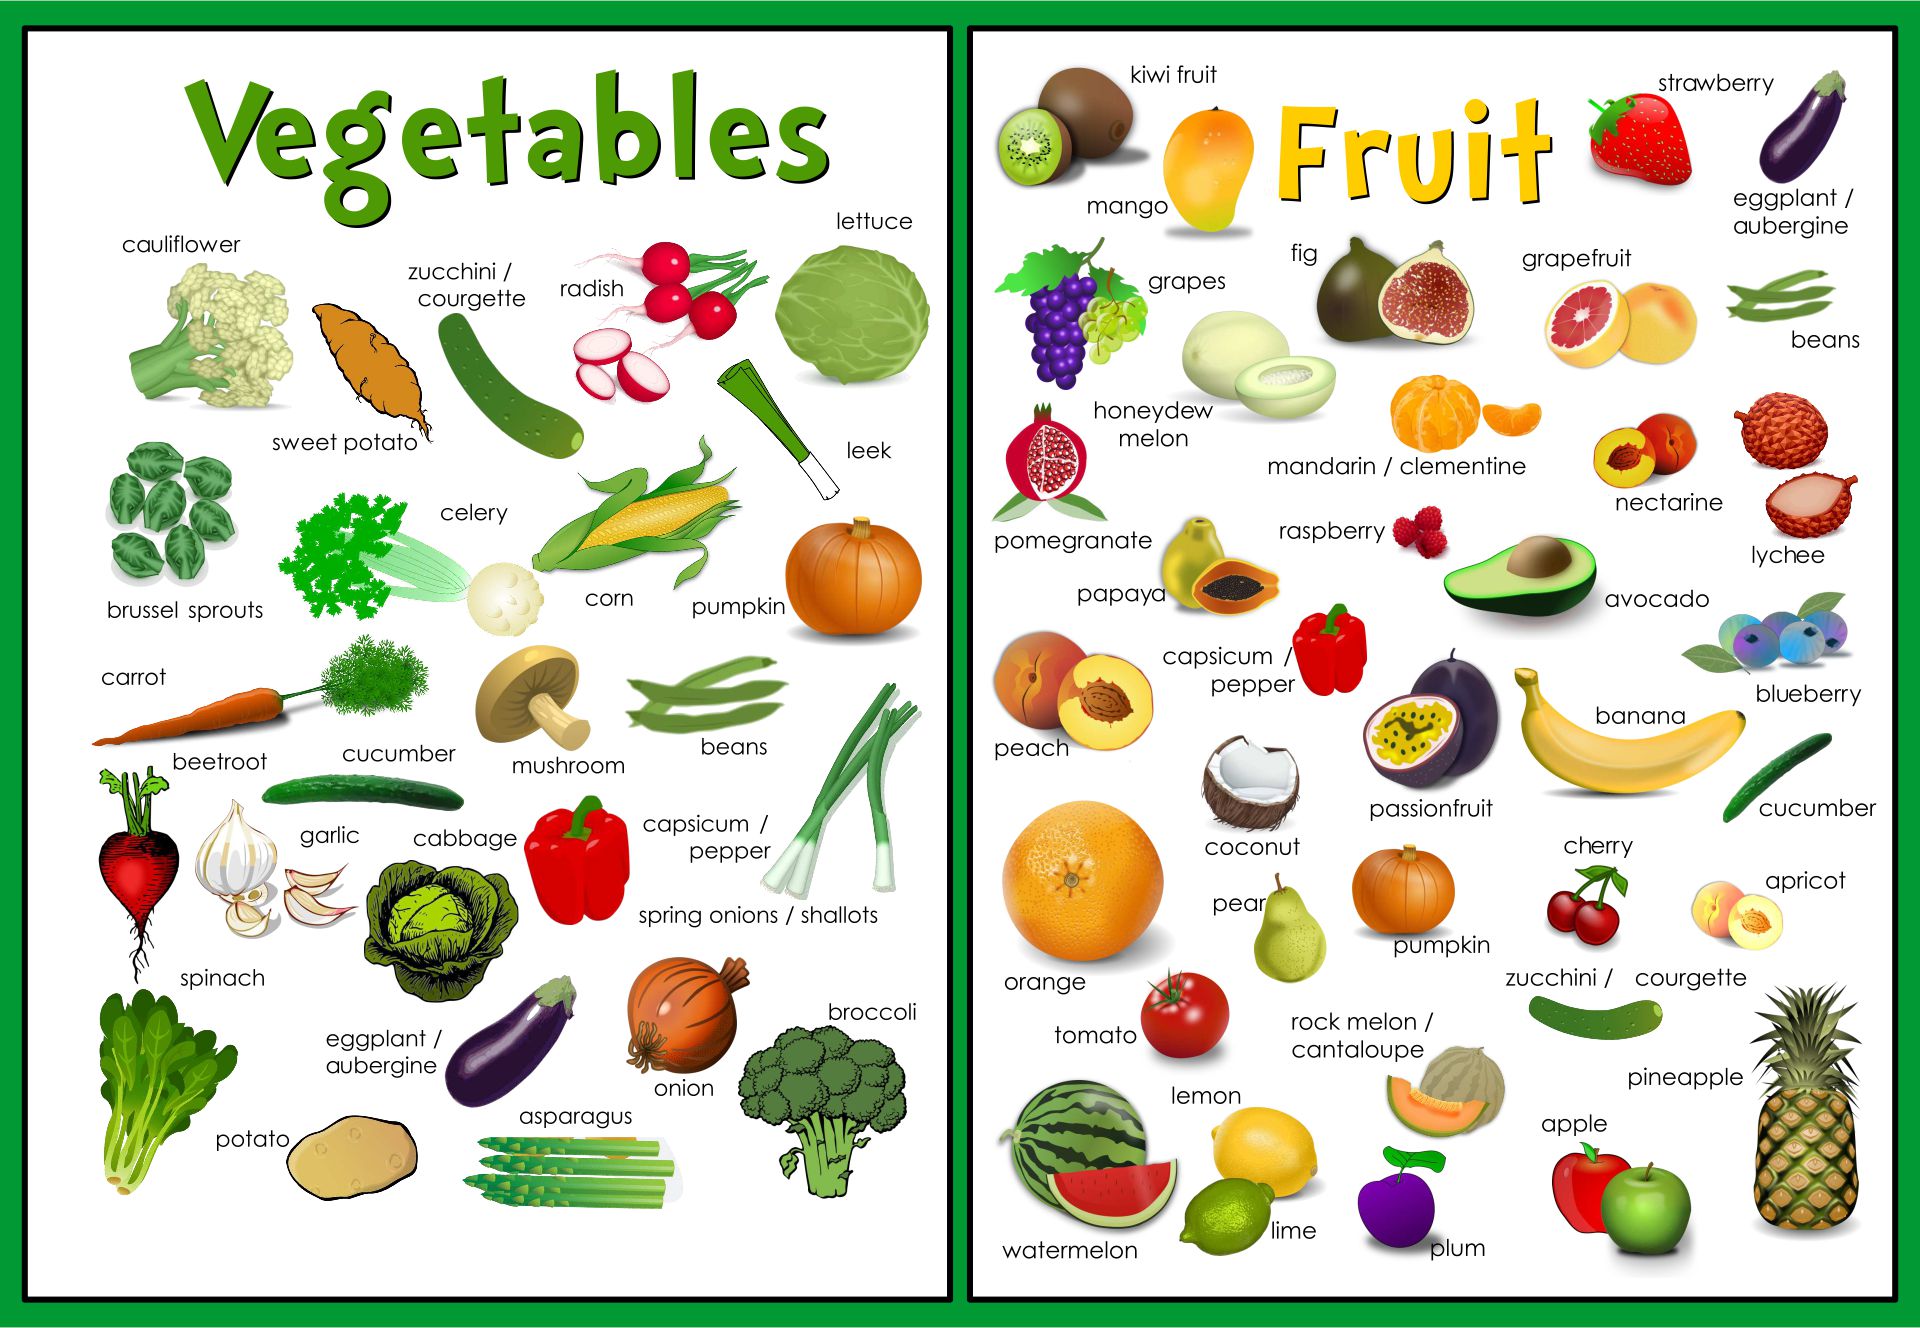 10 Best Free Printable Fruit And Vegetable Templates